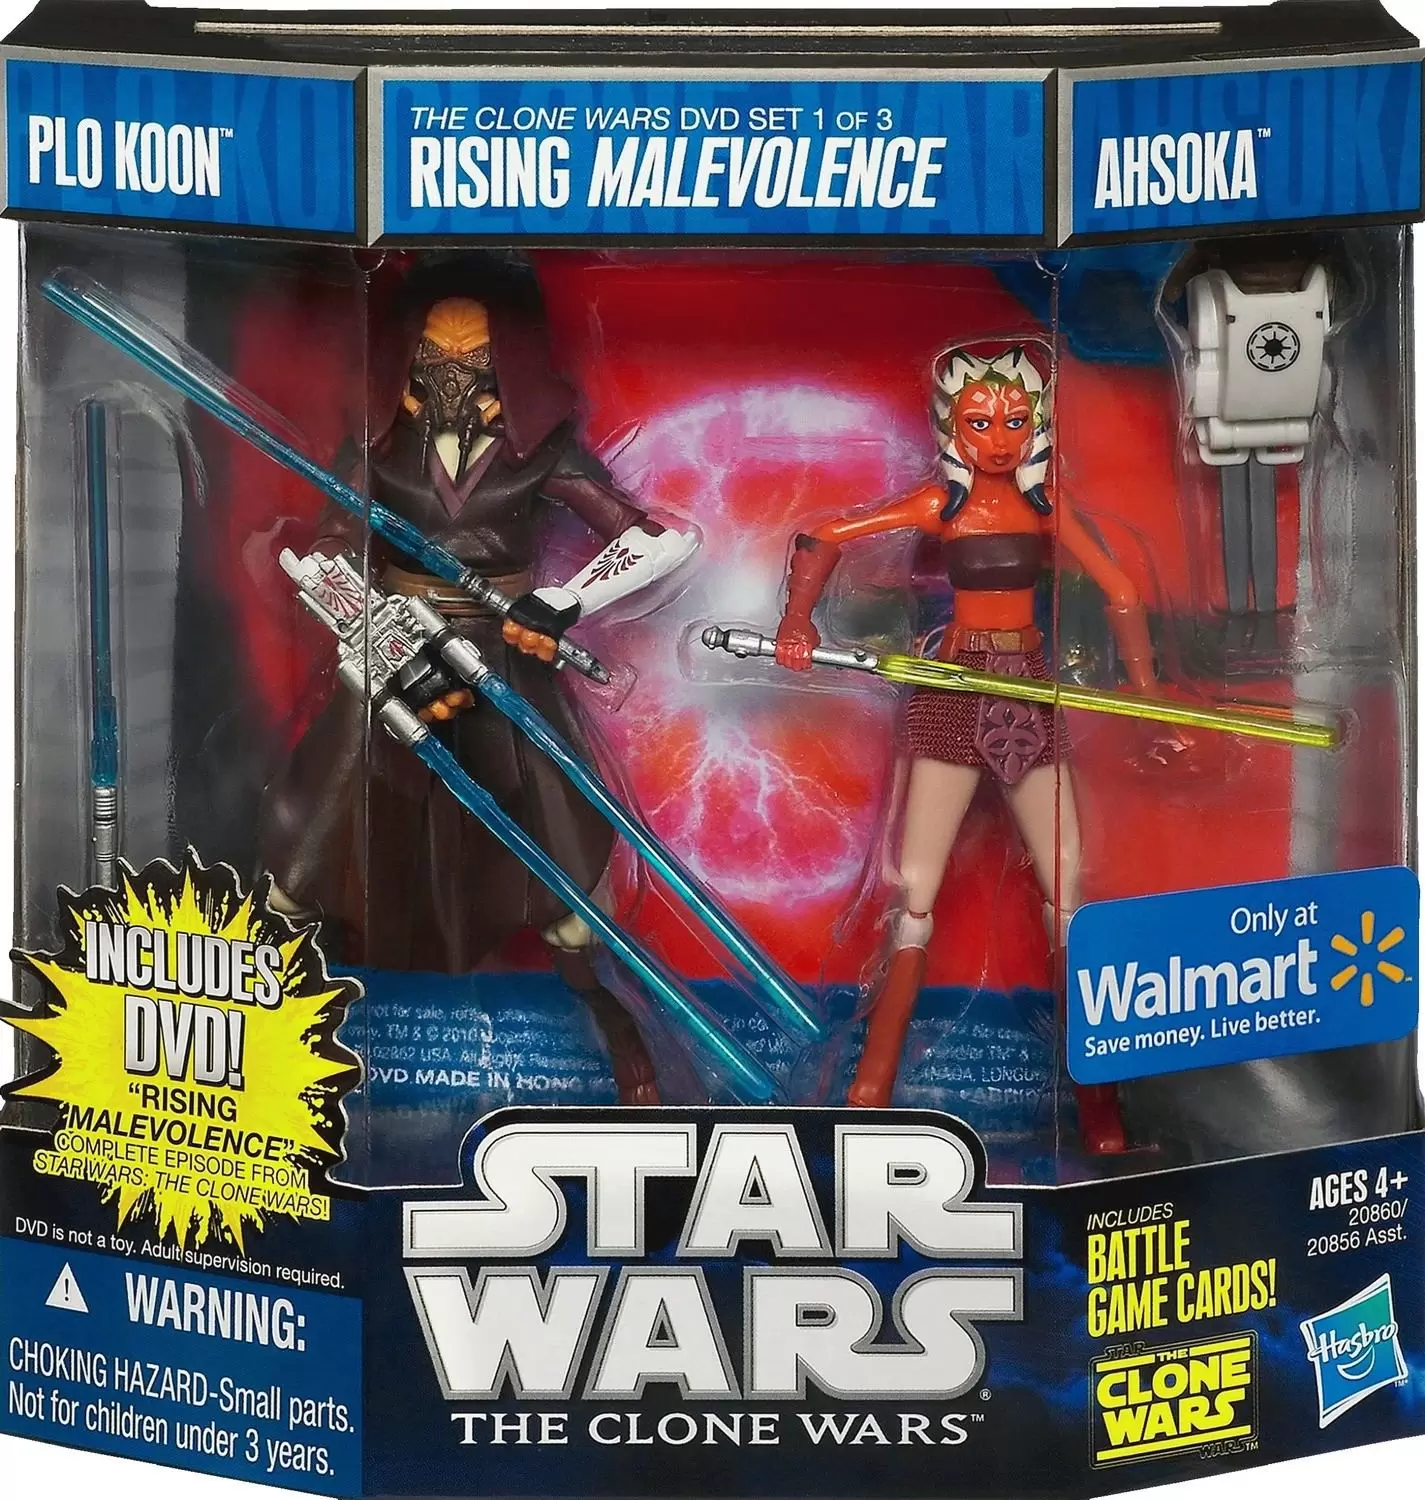 The Clone Wars - Shadow of the Dark Side - THE CLONE WARS DVD SET 1 of 3 RISING MALEVOLENCE